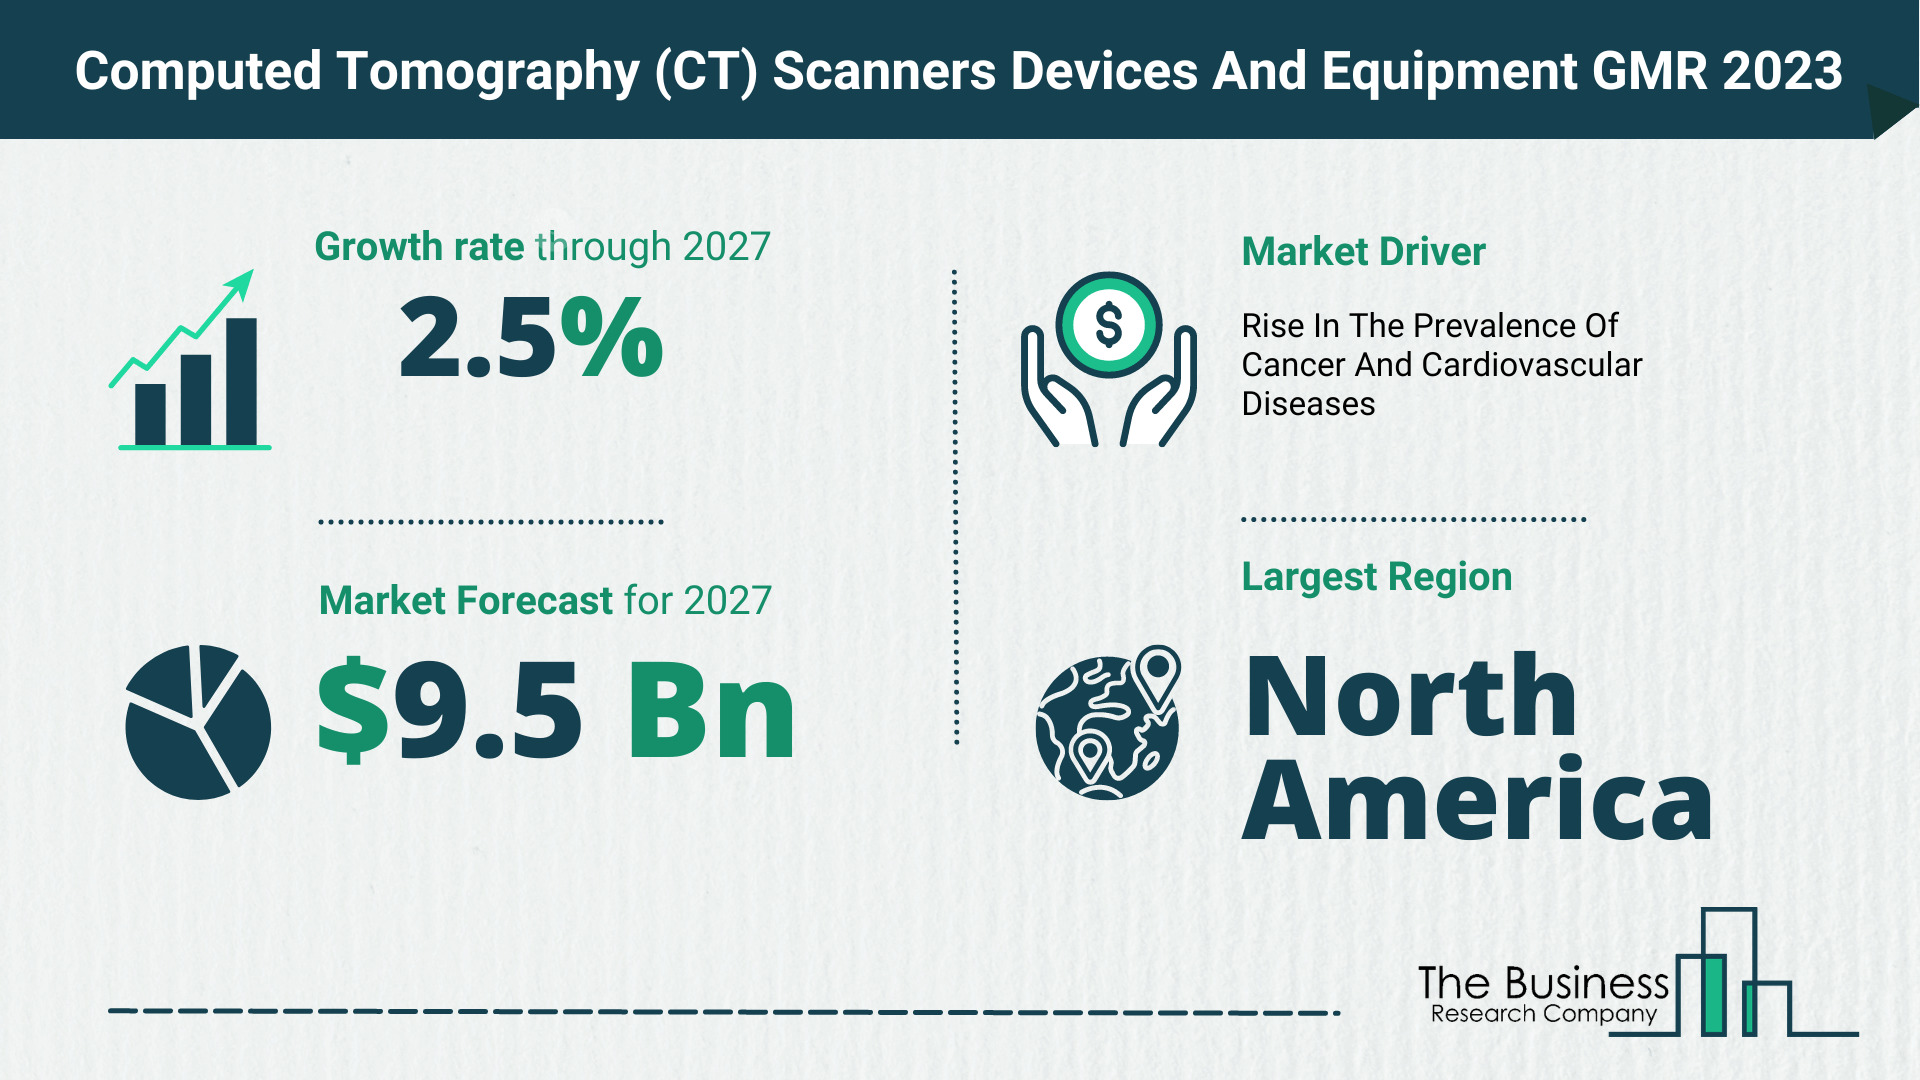 Global Computed Tomography (CT) Scanners Devices And Equipment Market